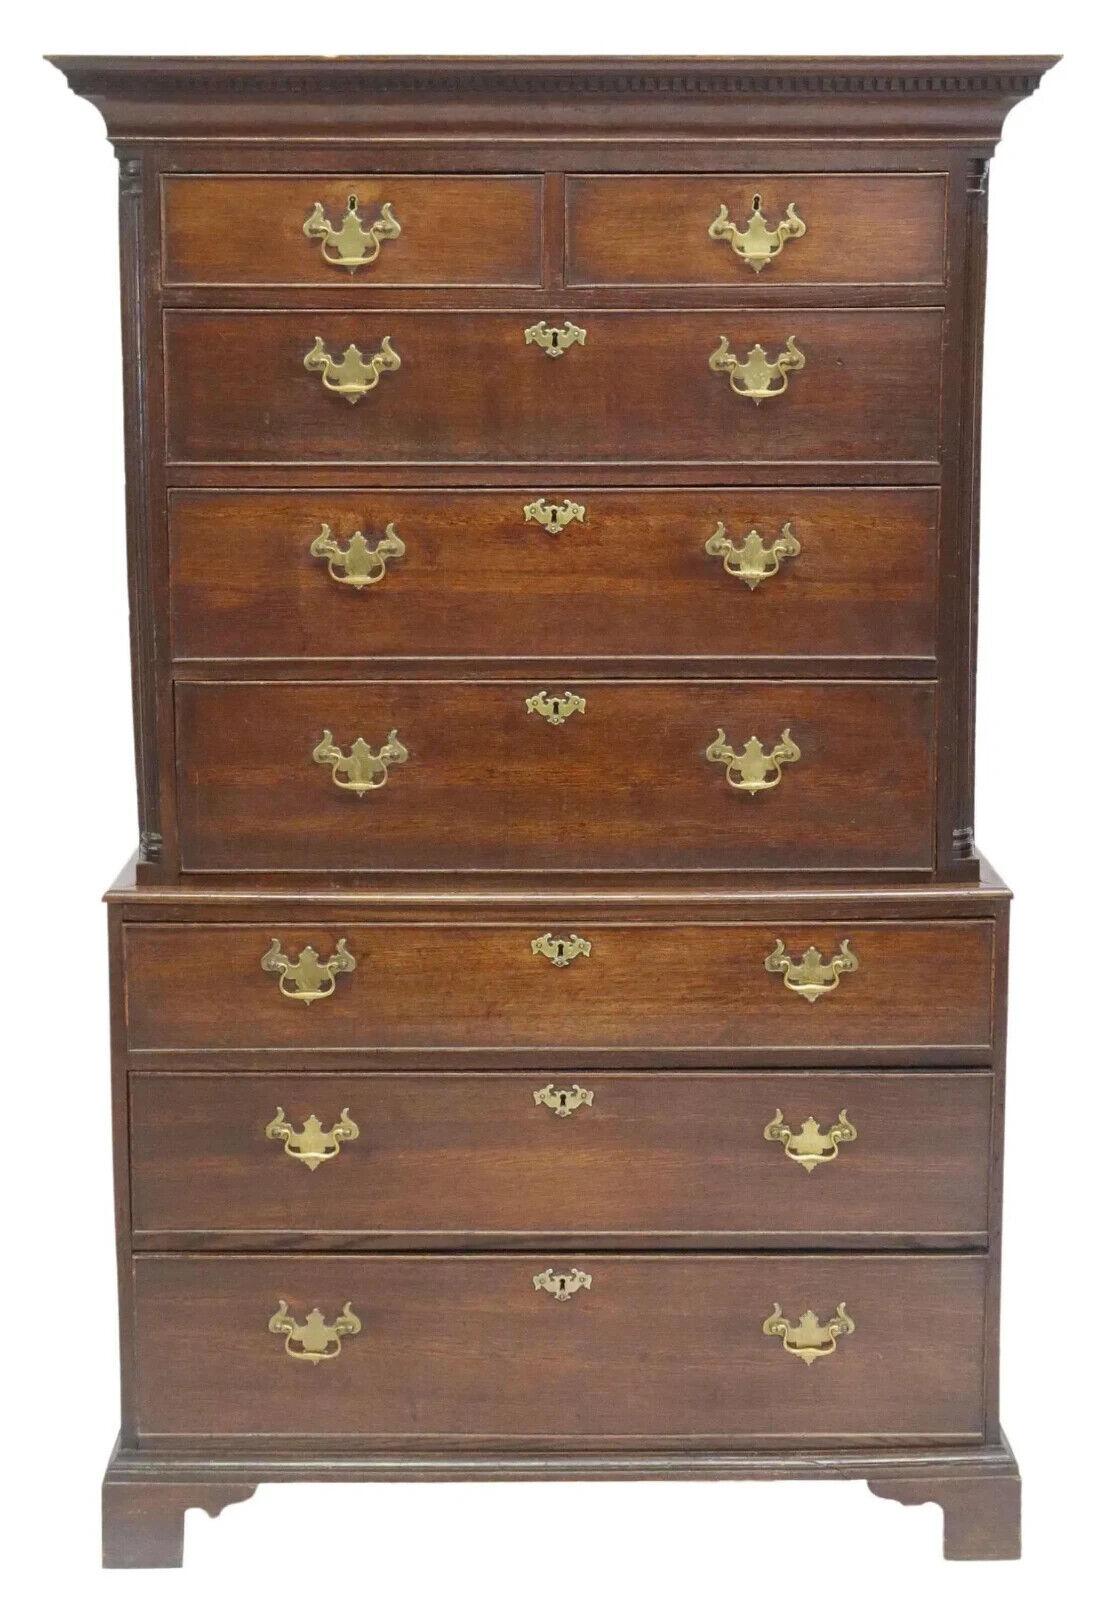 Gorgeous antique chest-on-chest, english georgian period, oak, cornice, 8 drawers, 1700s, 18th century!! This chest has multiple drawers for lots of storage
English Georgian period oak chest-on-chest, late 18th/ early 19th century, cornice with